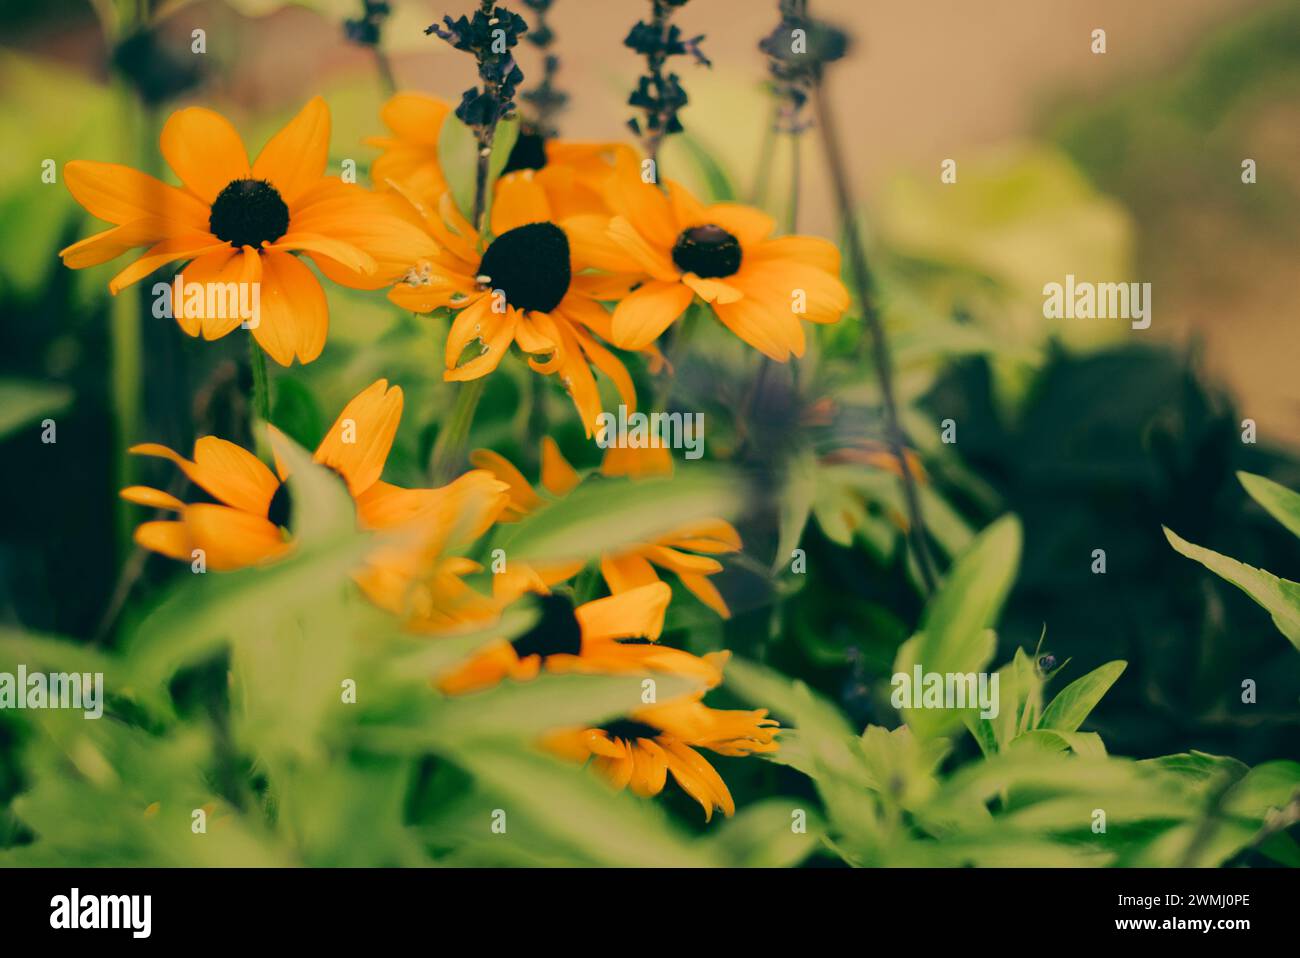 Species Black Eyed Susan or Rudbeckia hirta. Yellow wild chamomile flowers growing in cloudy weather. Decorative flowers. Stock Photo